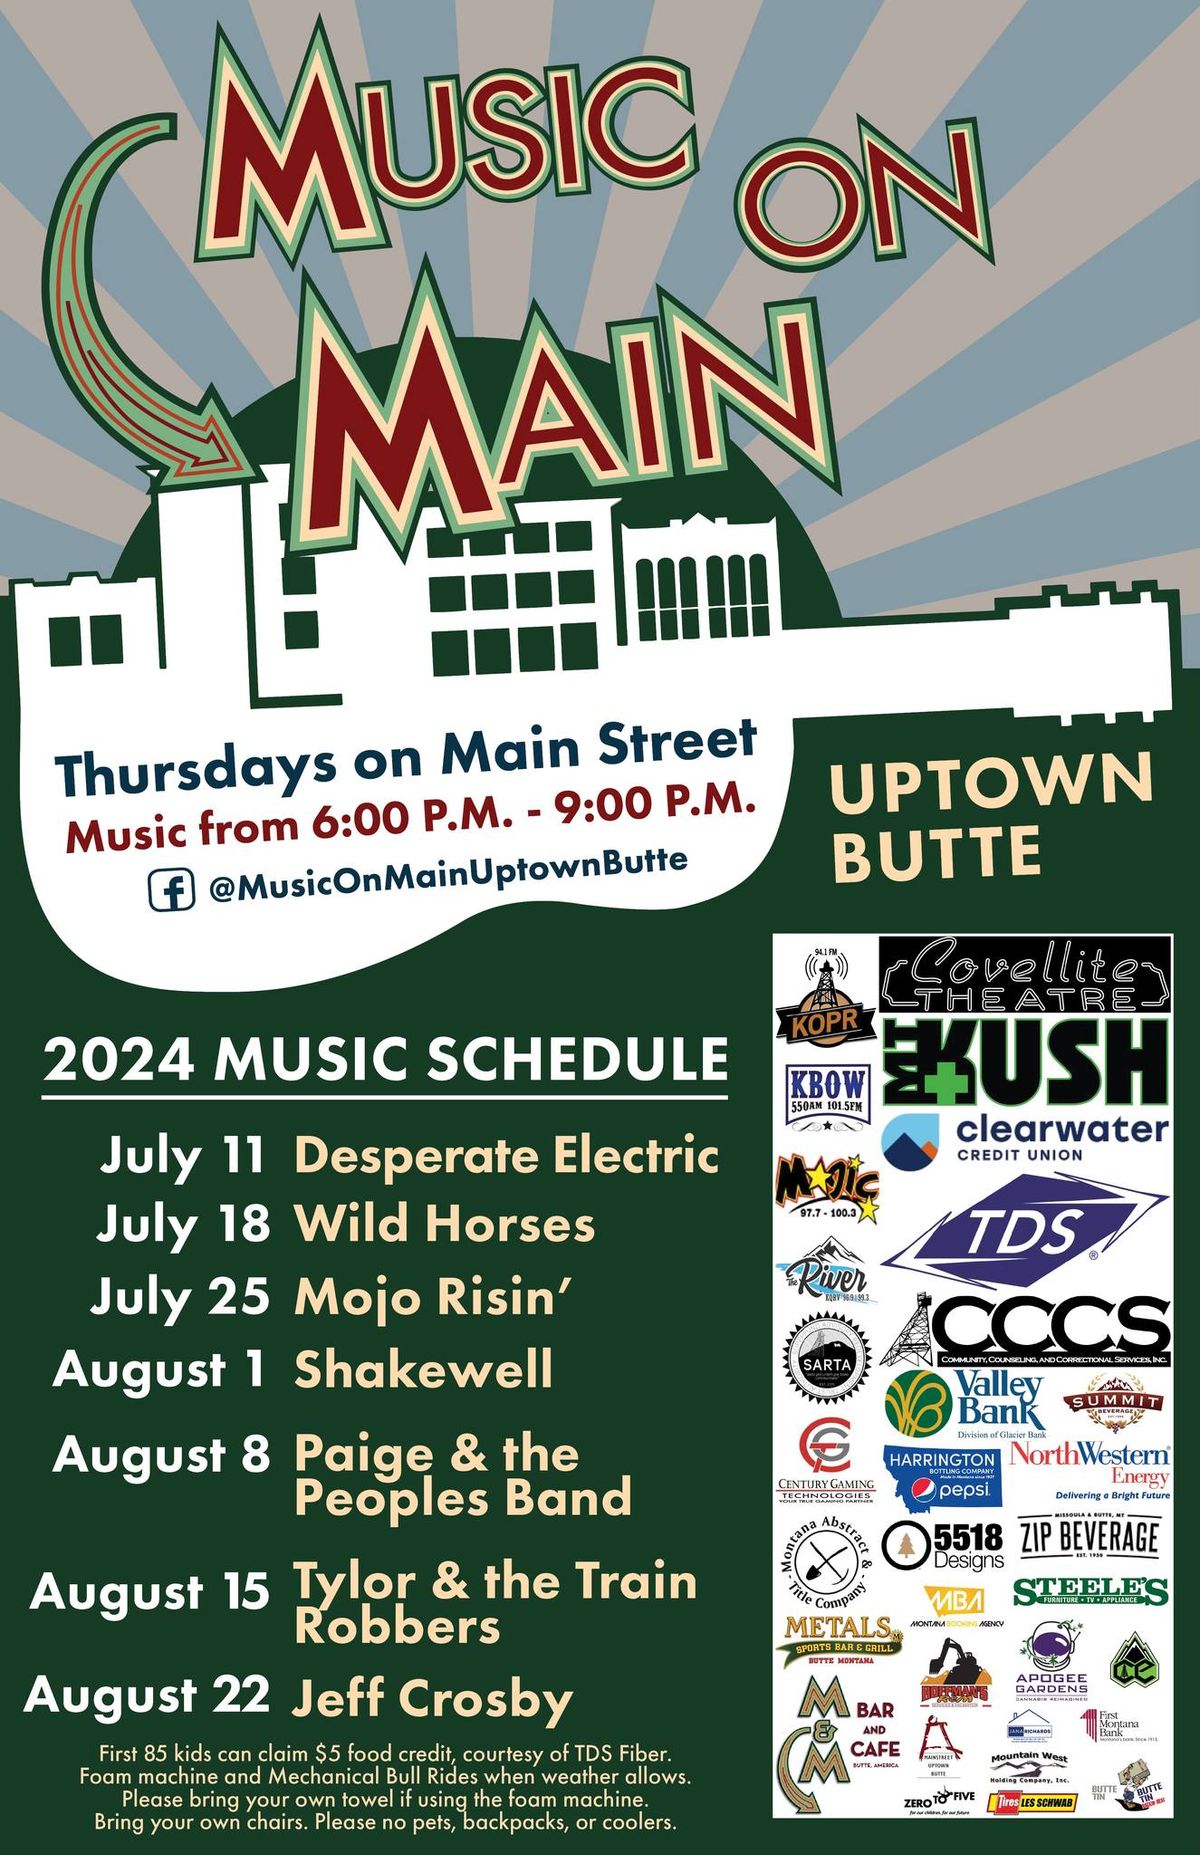 Music on Main - Uptown Butte